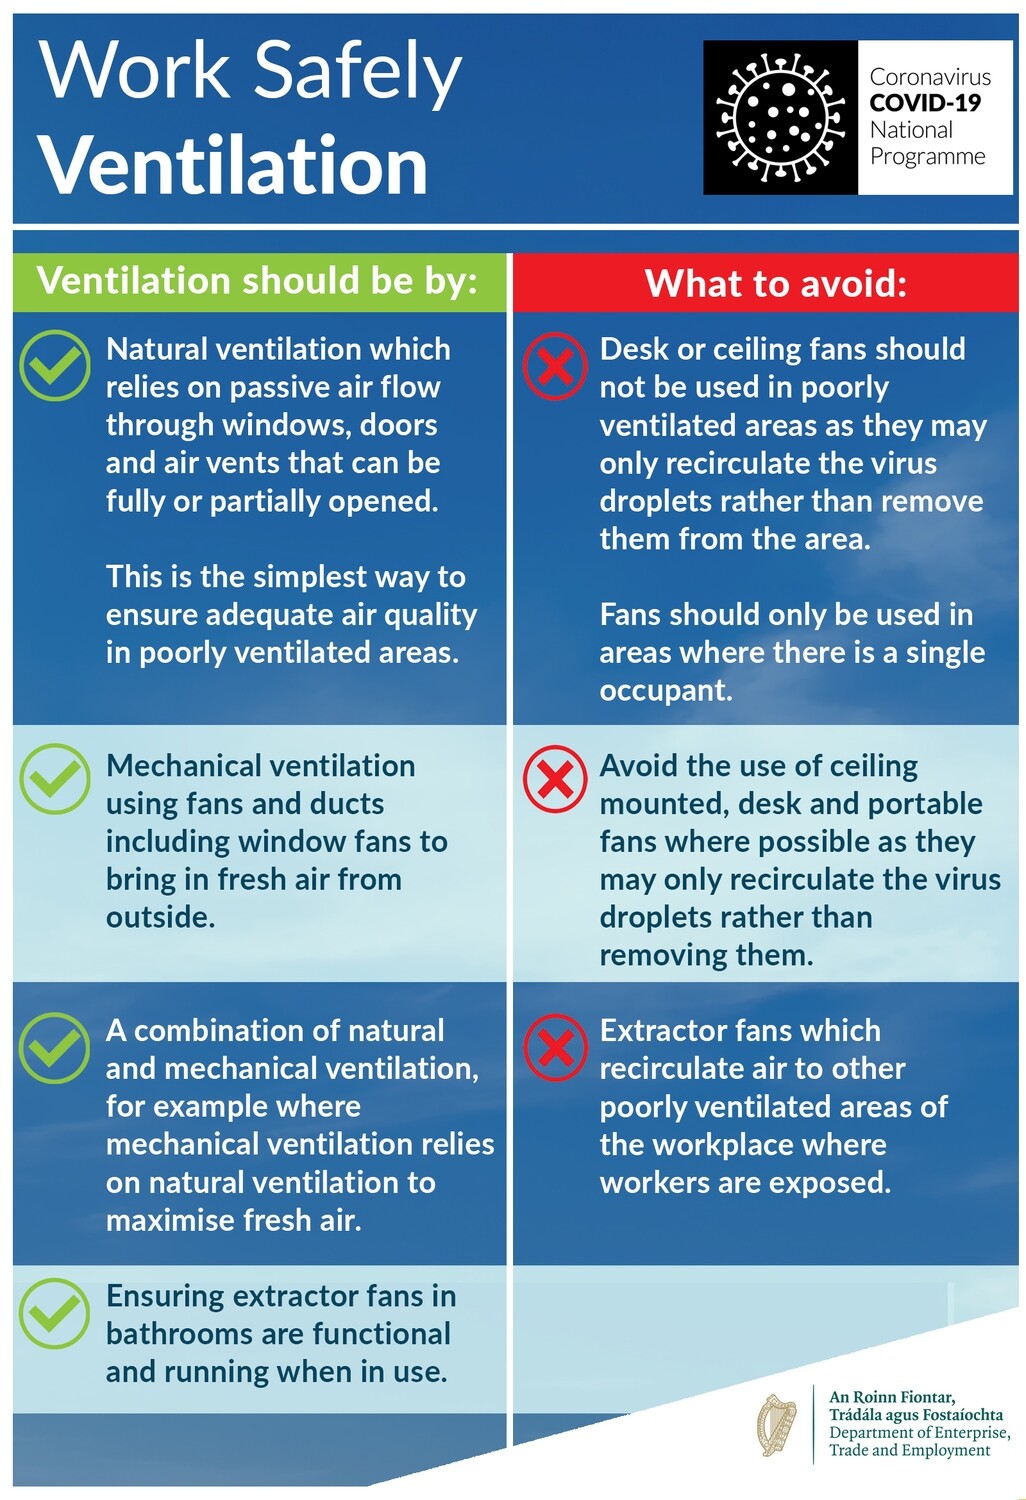 Guidance on non-healthcare building ventilation during
COVID-19